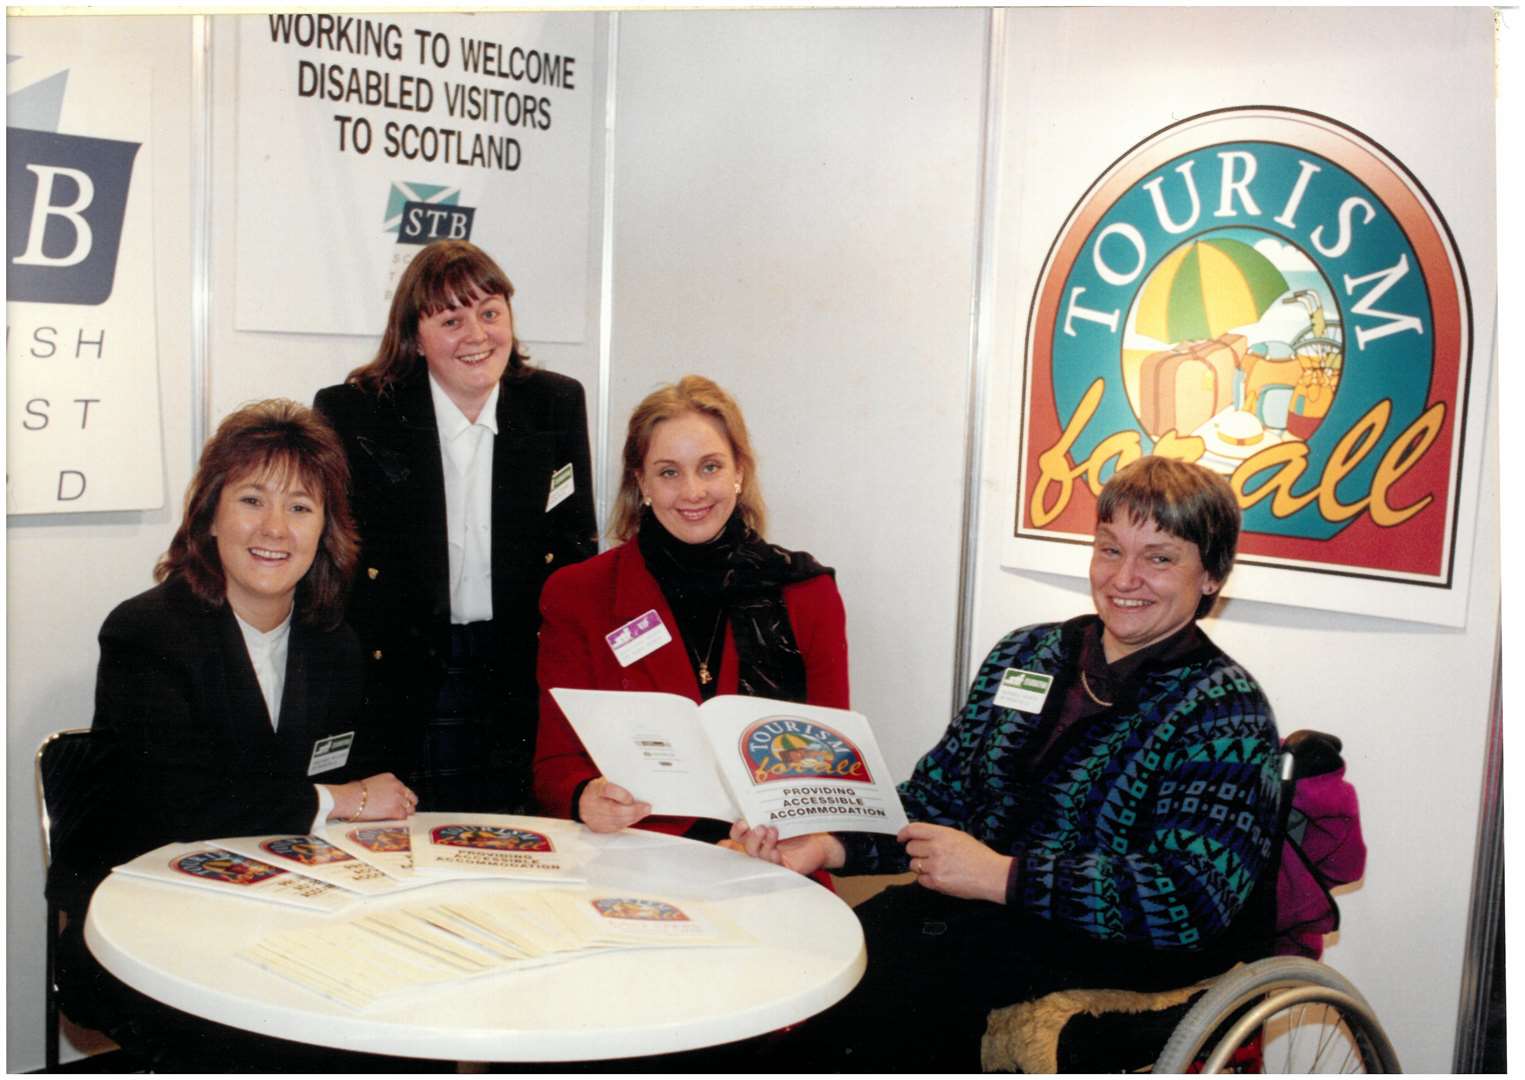 Philippa (centre) with fellow members of the Scottish Tourist Board. Following her marriage in 1971, she moved to Rothiemurchus in 1975. She worked in partnership with her husband to develop the estate which now has about 50 team members in a multiple land-use business.Rothiemurchus welcomes 300,000-500,000 visitors annually to an area of the Cairngorms National Park. She also served on a wide range of local and national bodies and was described by her family as a “life force” and was awarded an MBE for services to NHS Scotland.